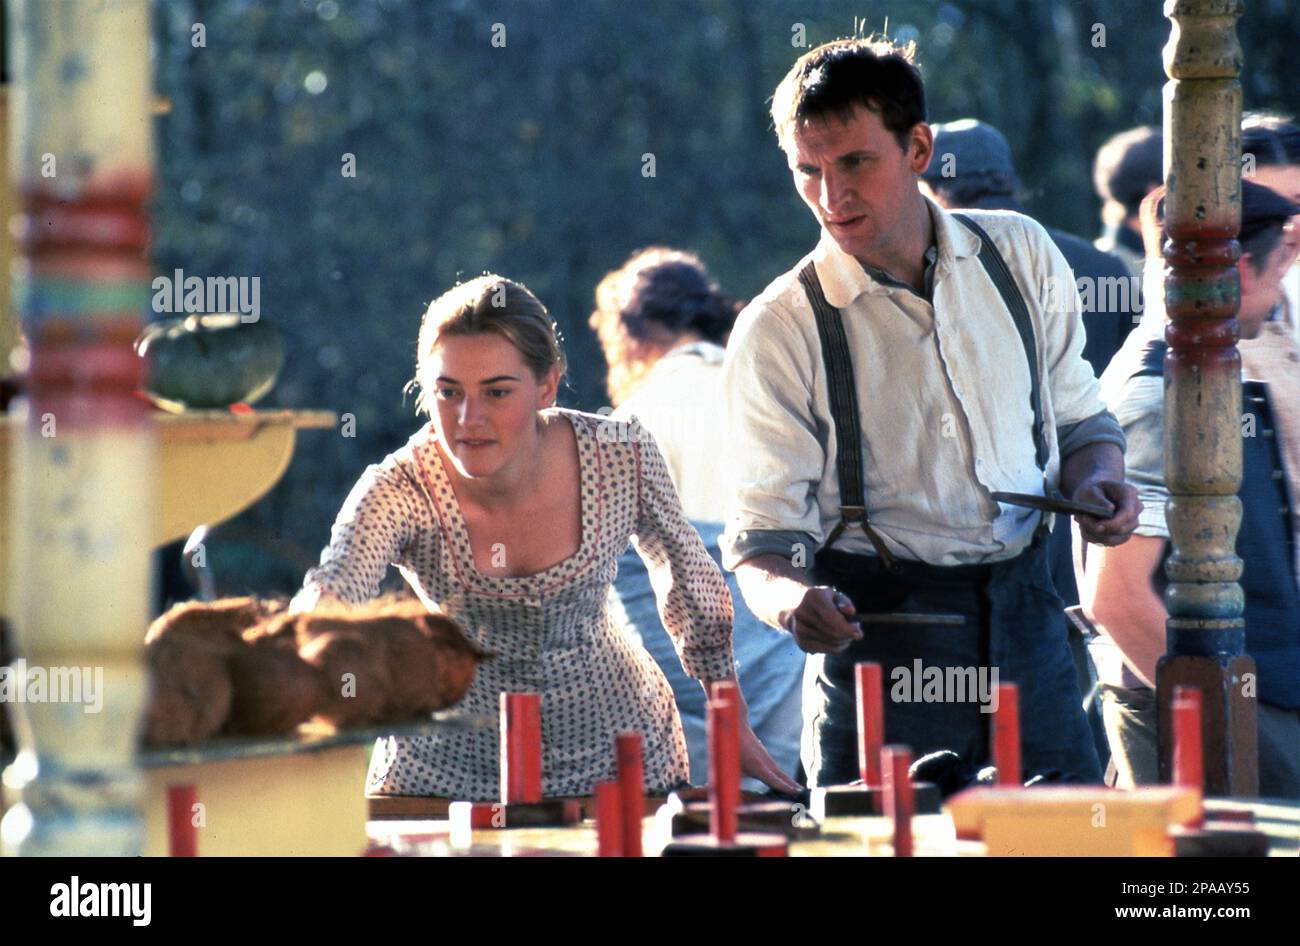 KATE WINSLET and CHRISTOPHER ECCLESTON in JUDE 1996 director MICHAEL WINTERBOTTOM novel Jude the Obscure by Thomas Hardy screenplay Hossein Amini costume design Janty Yates BBC Films / British Broadcasting Corporation / PolyGram Filmed Entertainment / Revolution Films Stock Photo